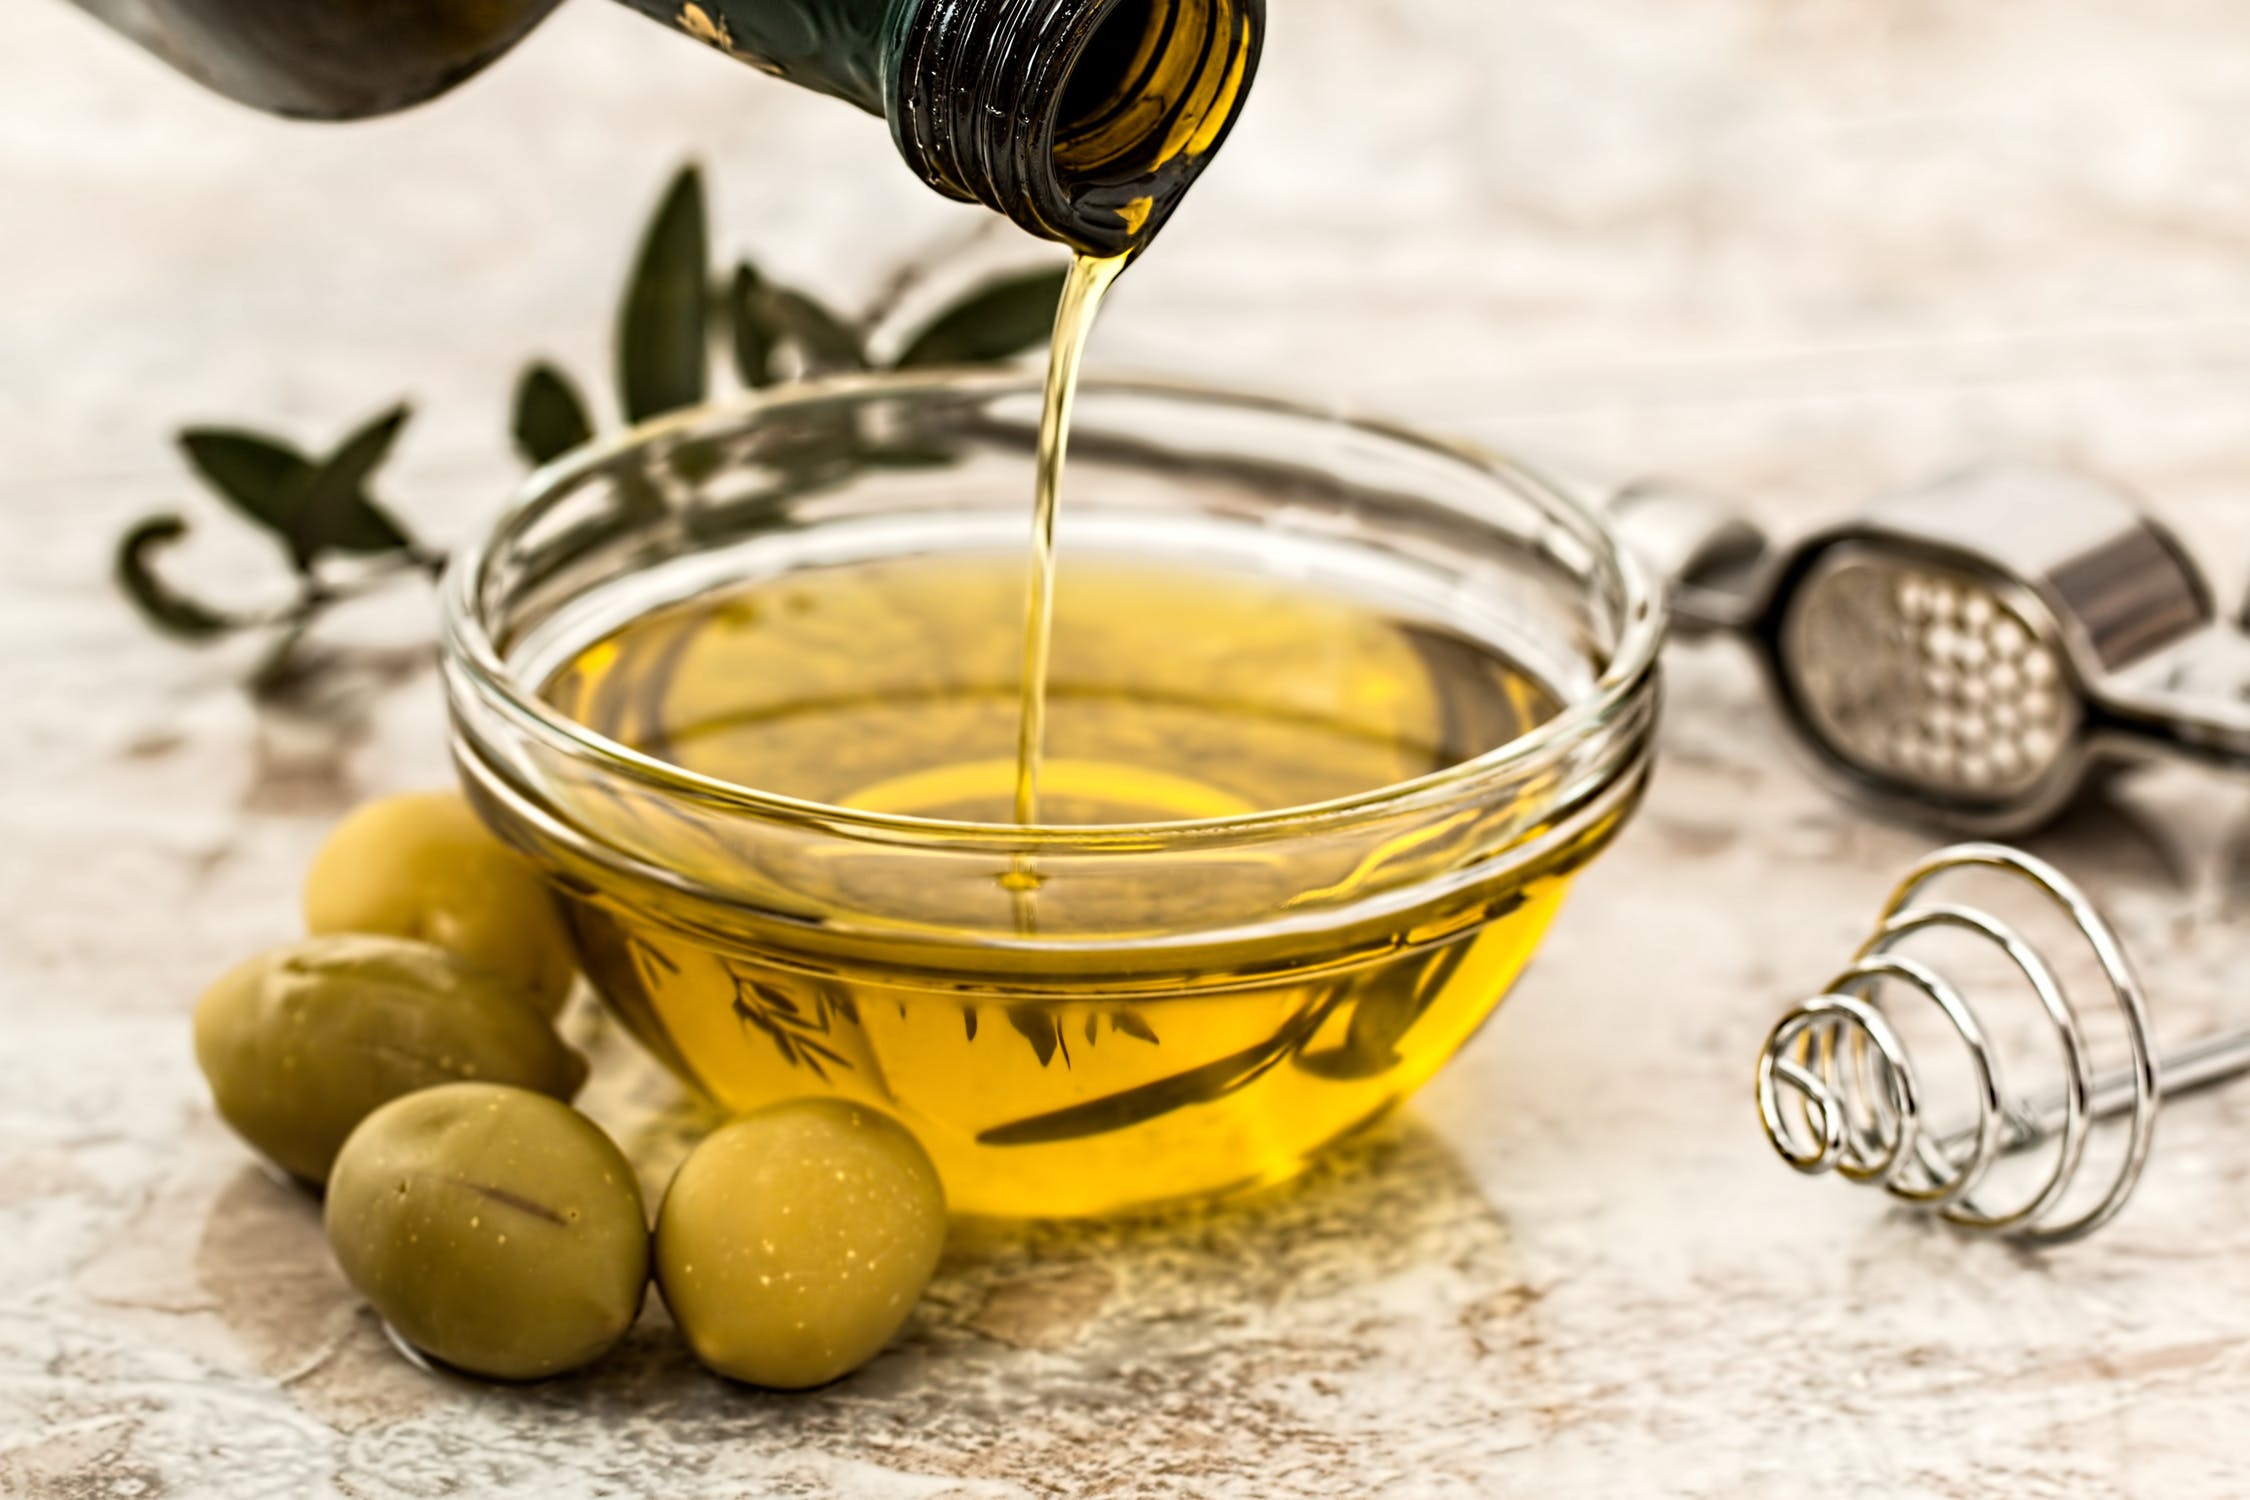 Olive oil is the healthiest oil for low to moderately high-heat cooking.